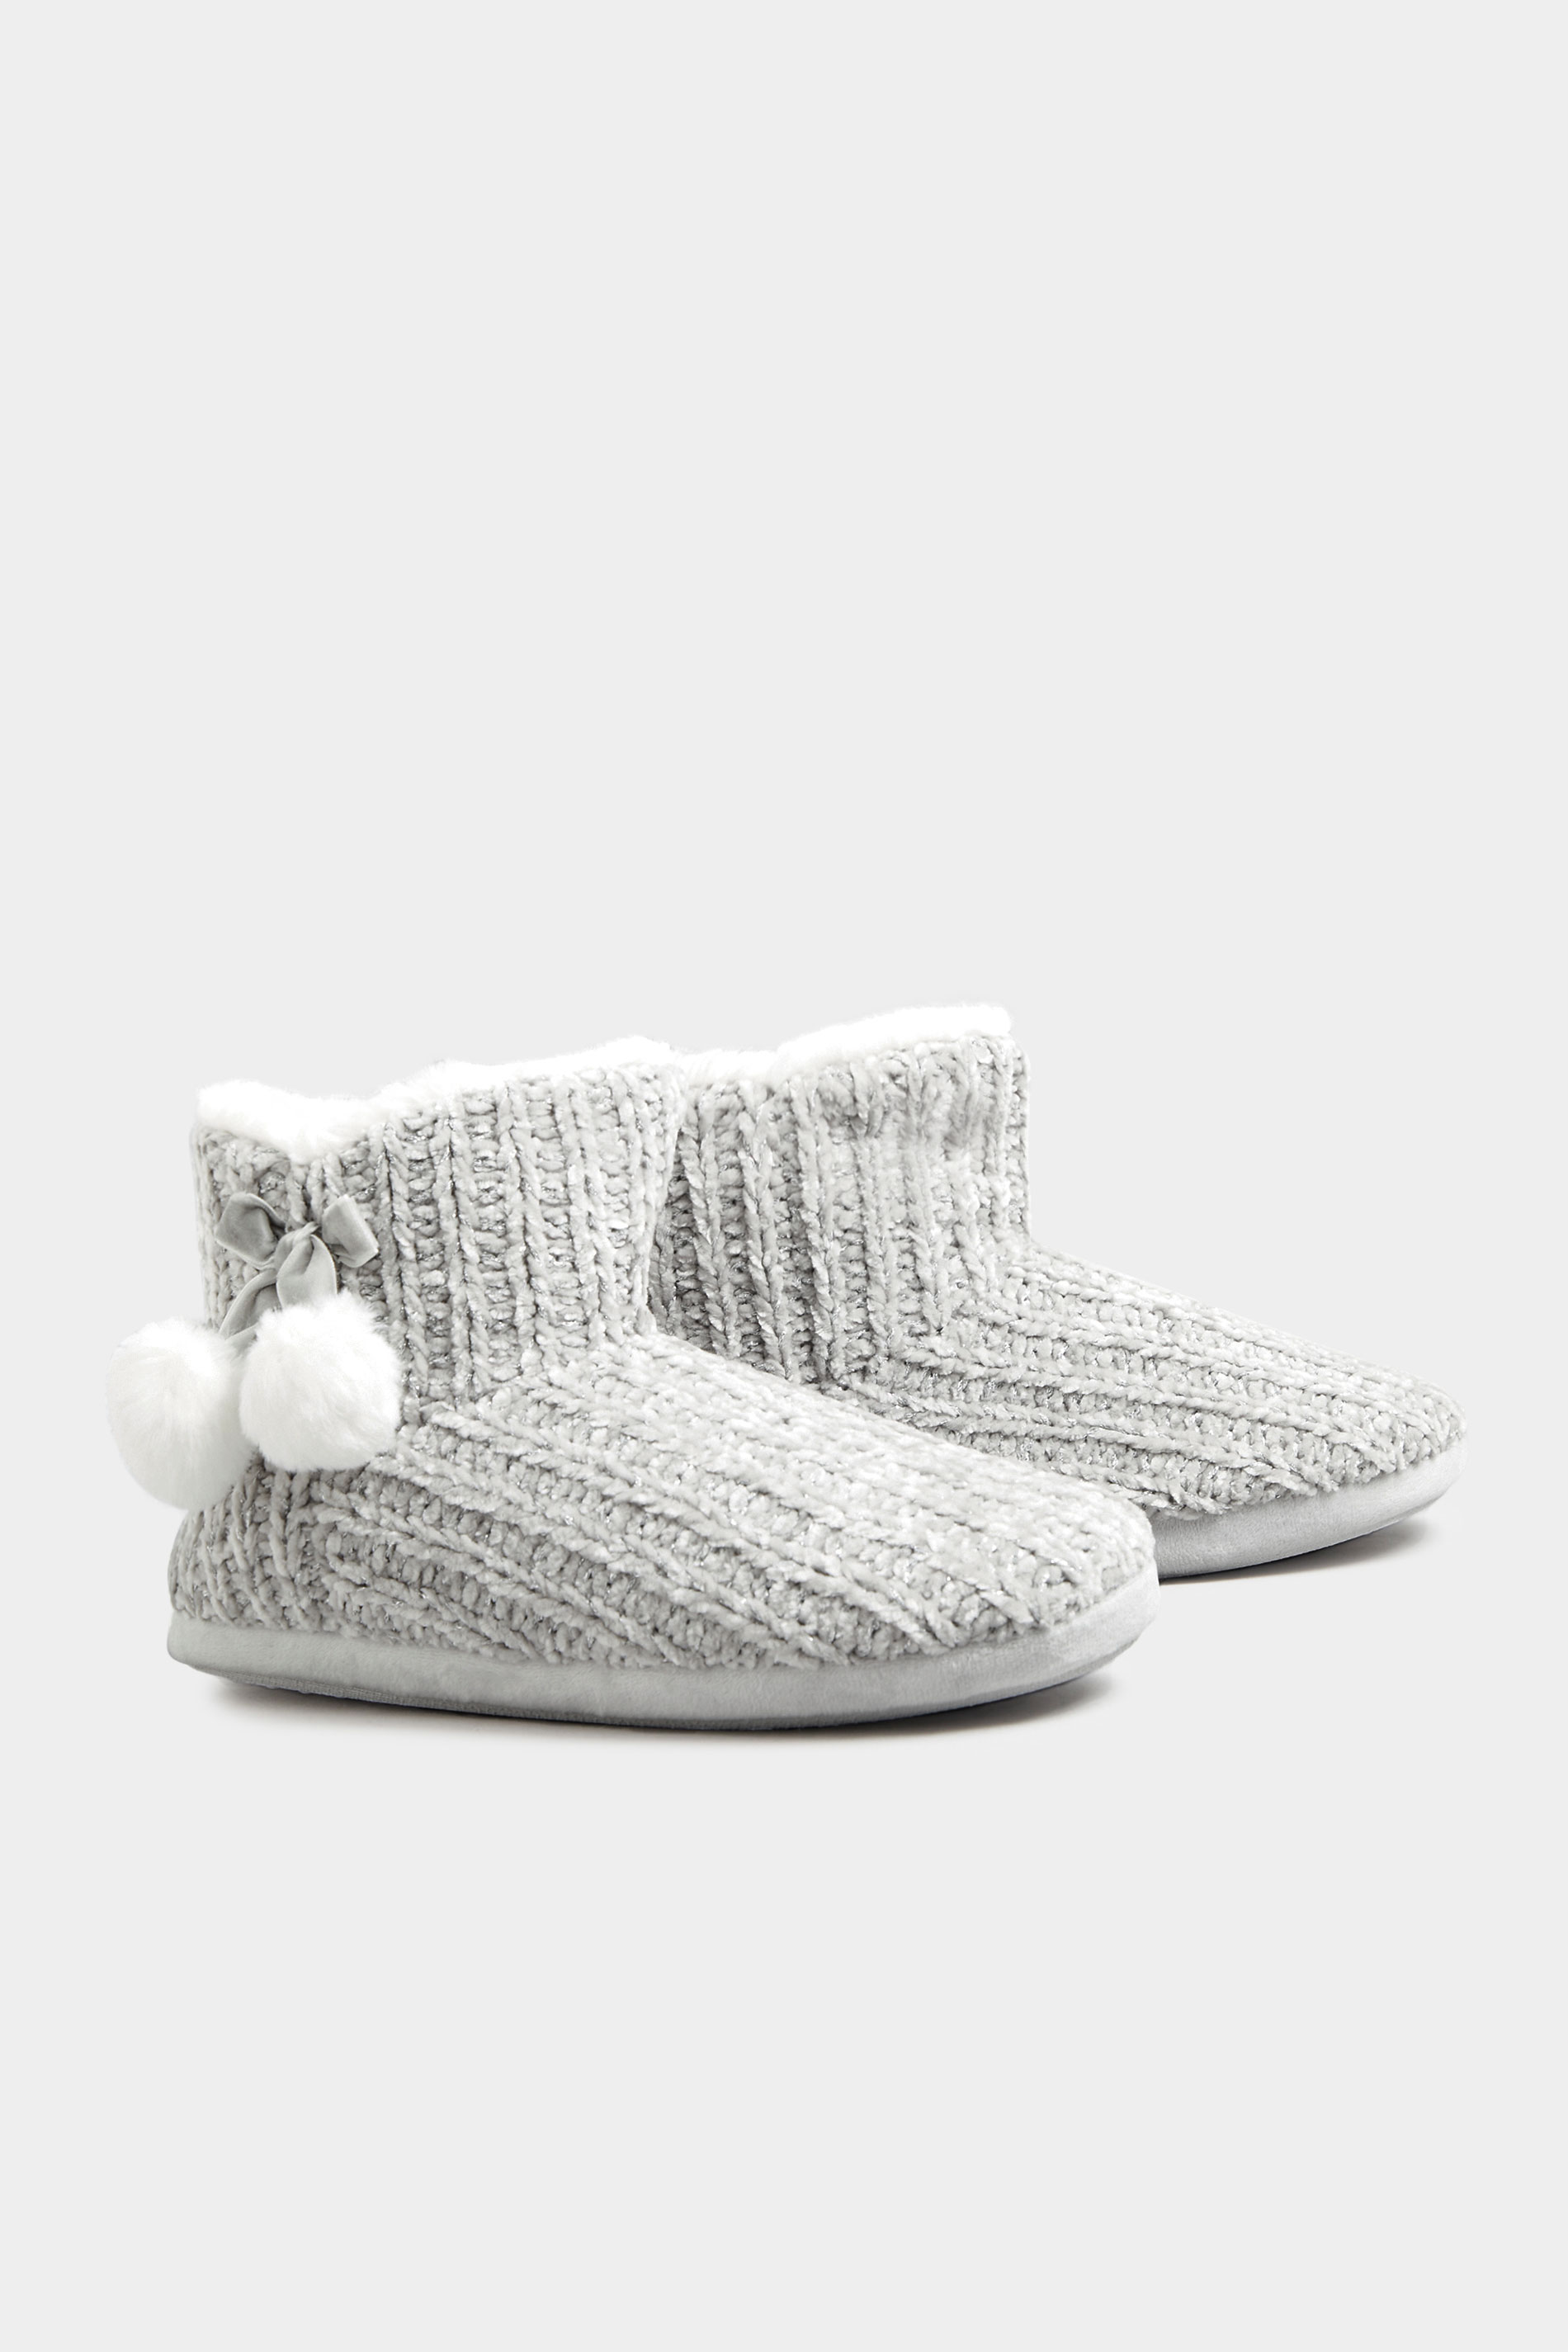 Grey Pom Pom Boot Slippers In Extra Wide EEE Fit_C.jpg